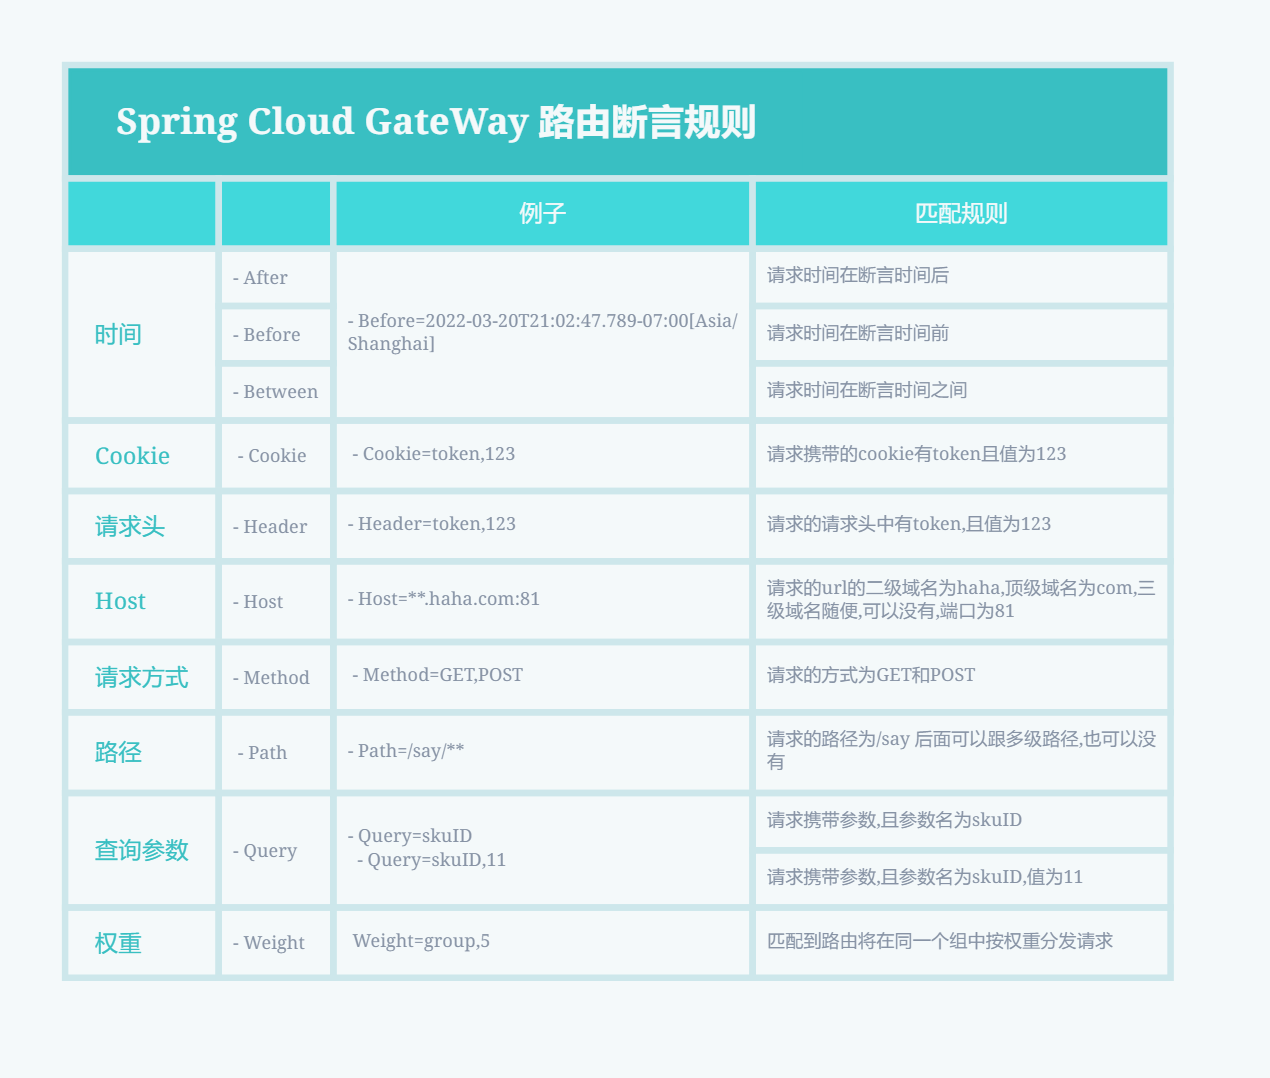 Spring Cloud GateWay Routing Assertion Rules